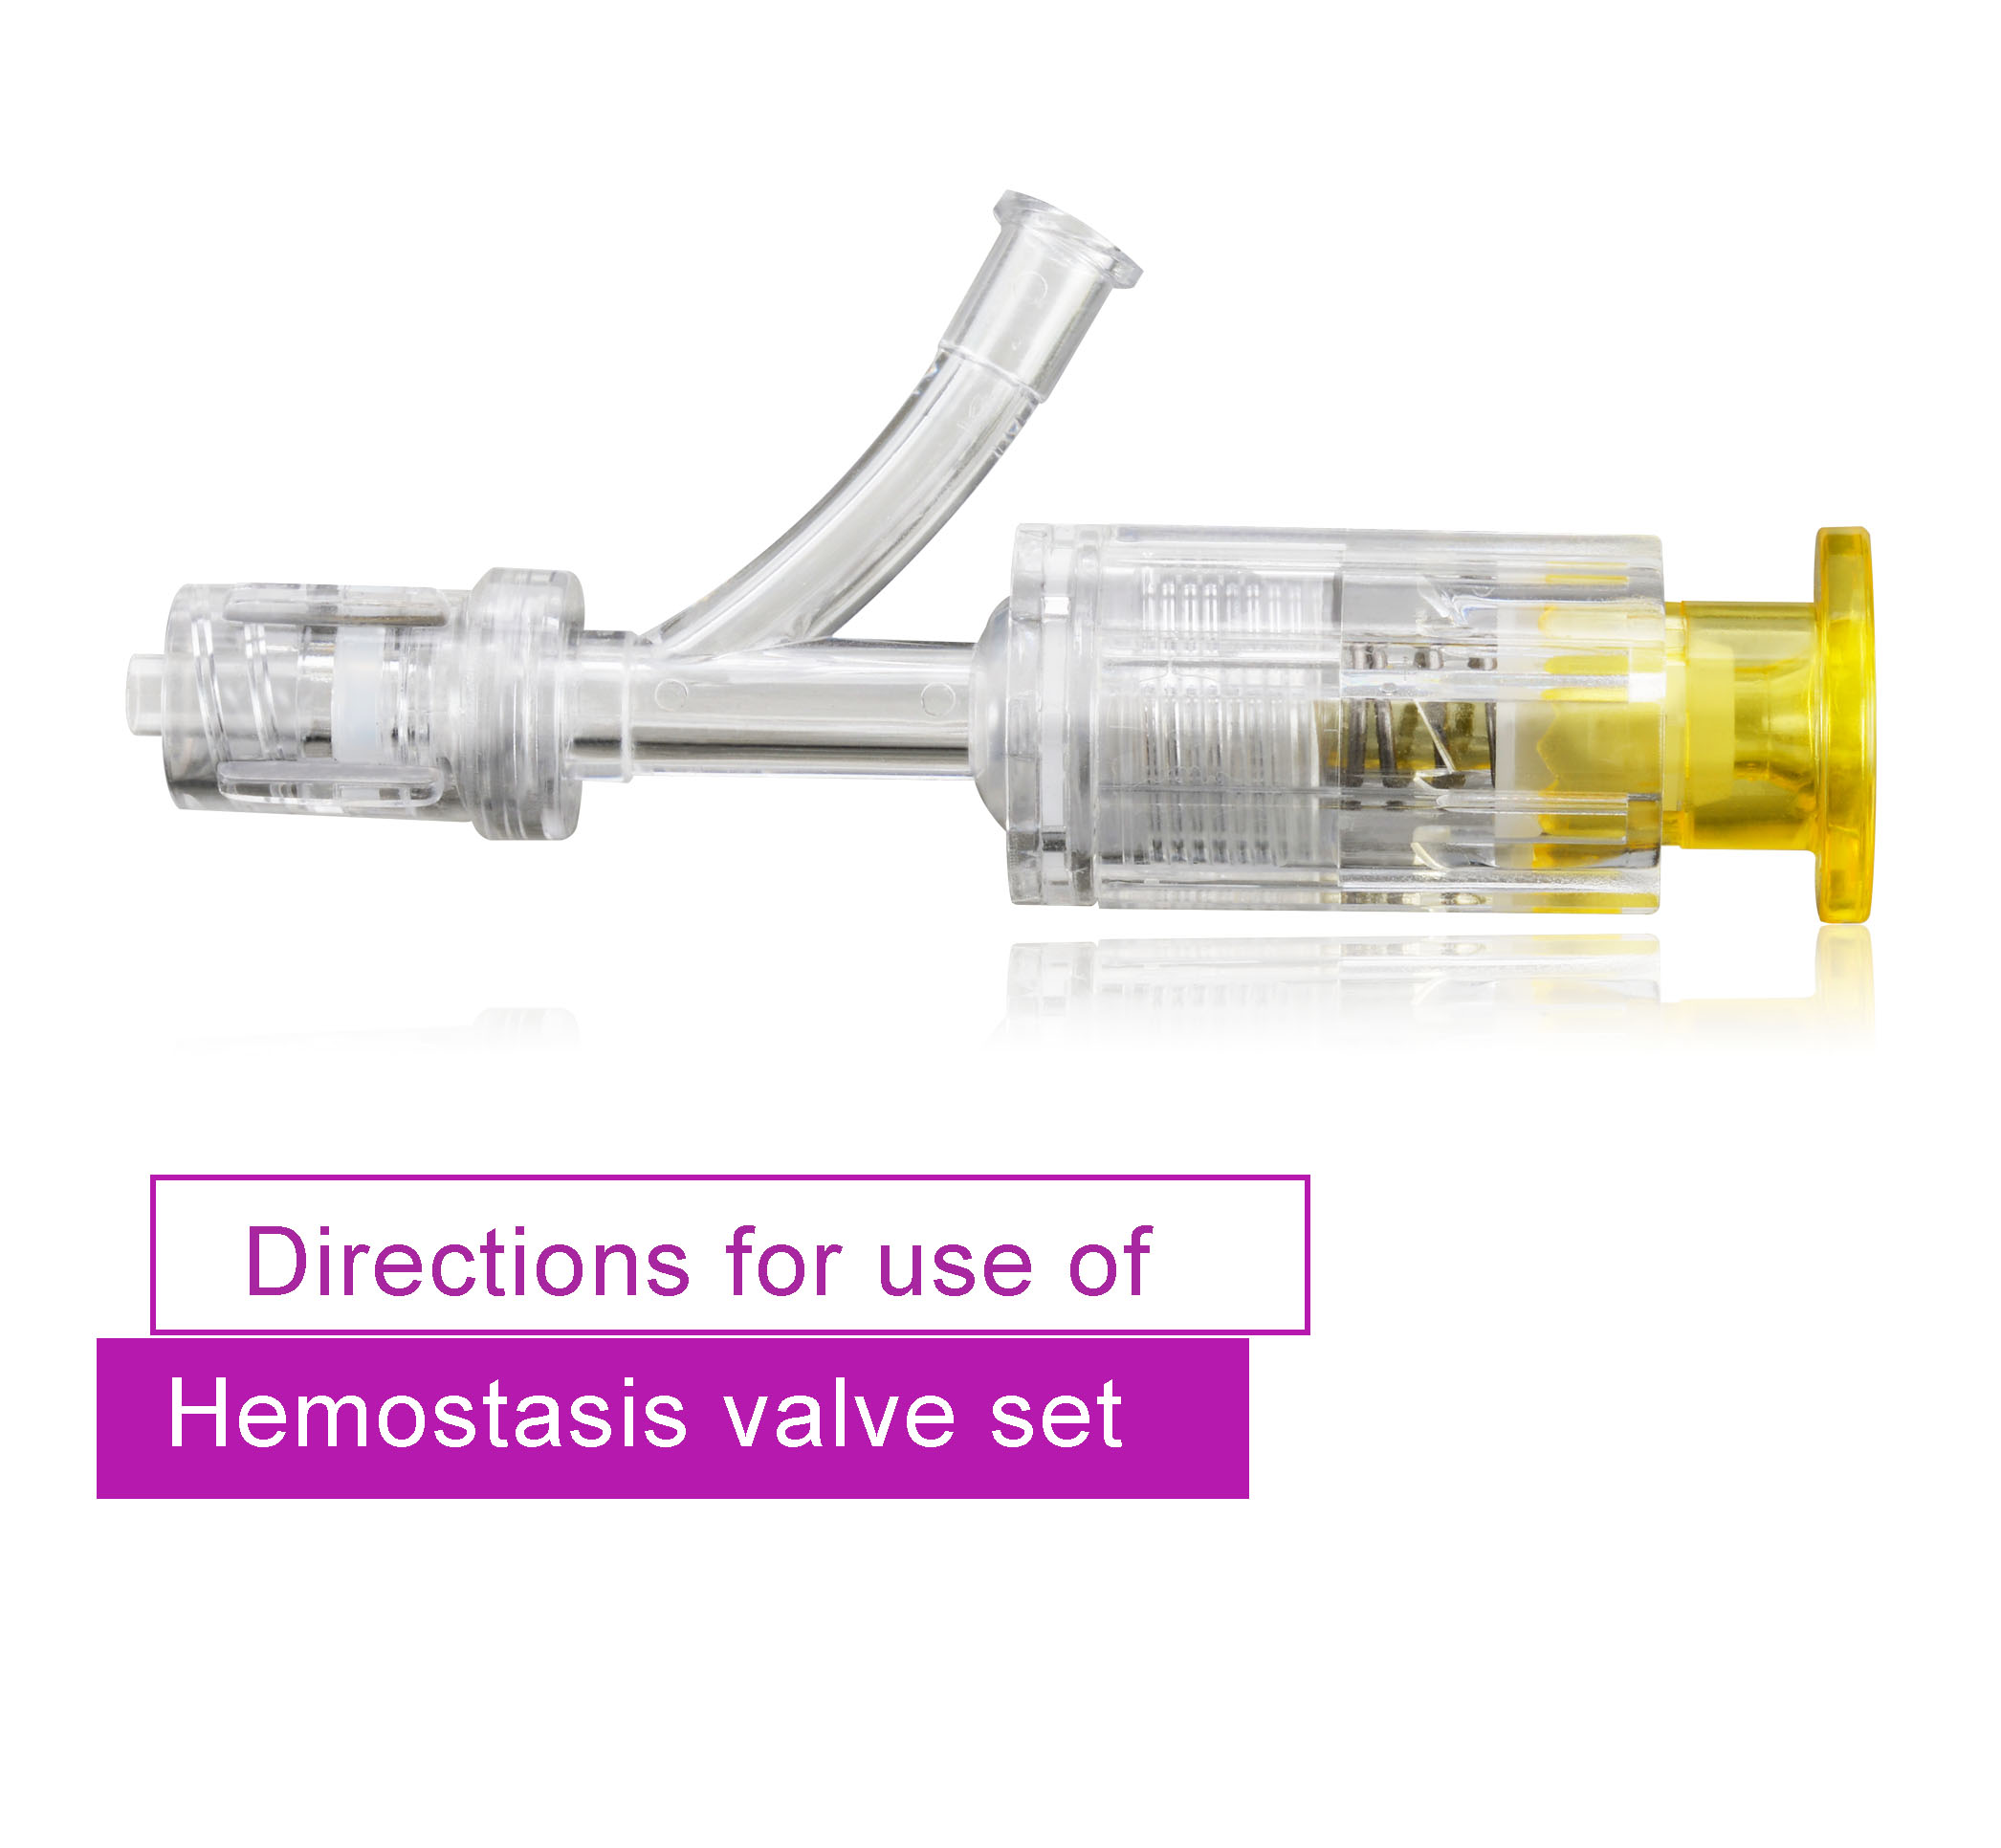 Directions for use of Hemostasis valve set